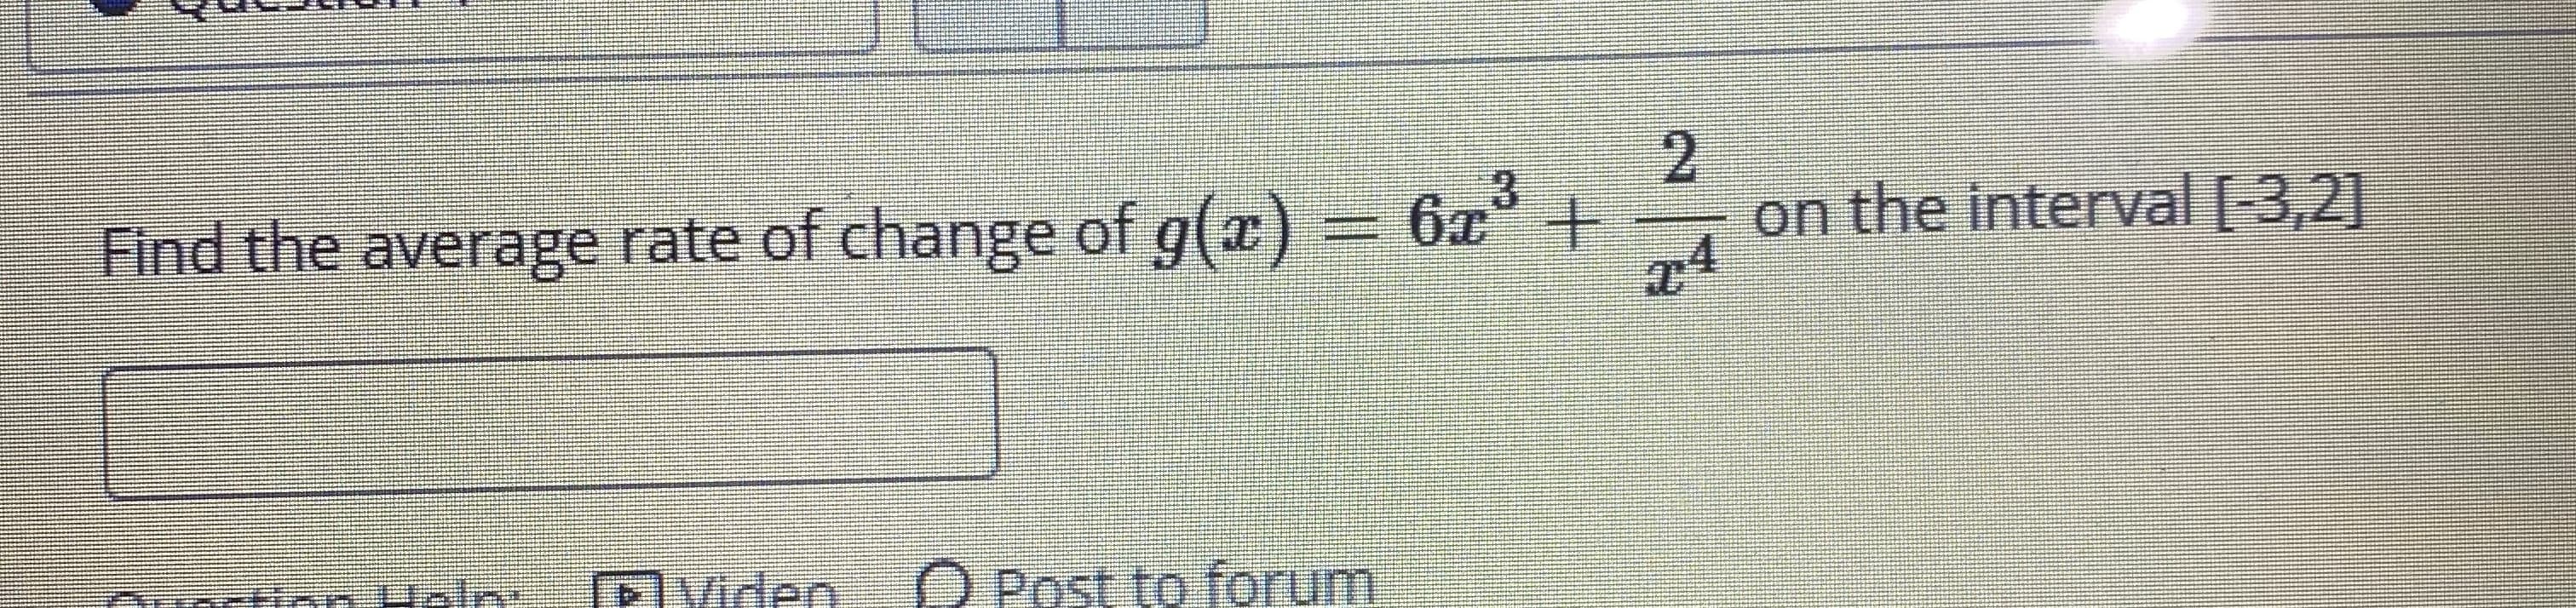 2.
on the interval [-3,2]
3.
Find the average rate of change of g(x) = 6x° +
